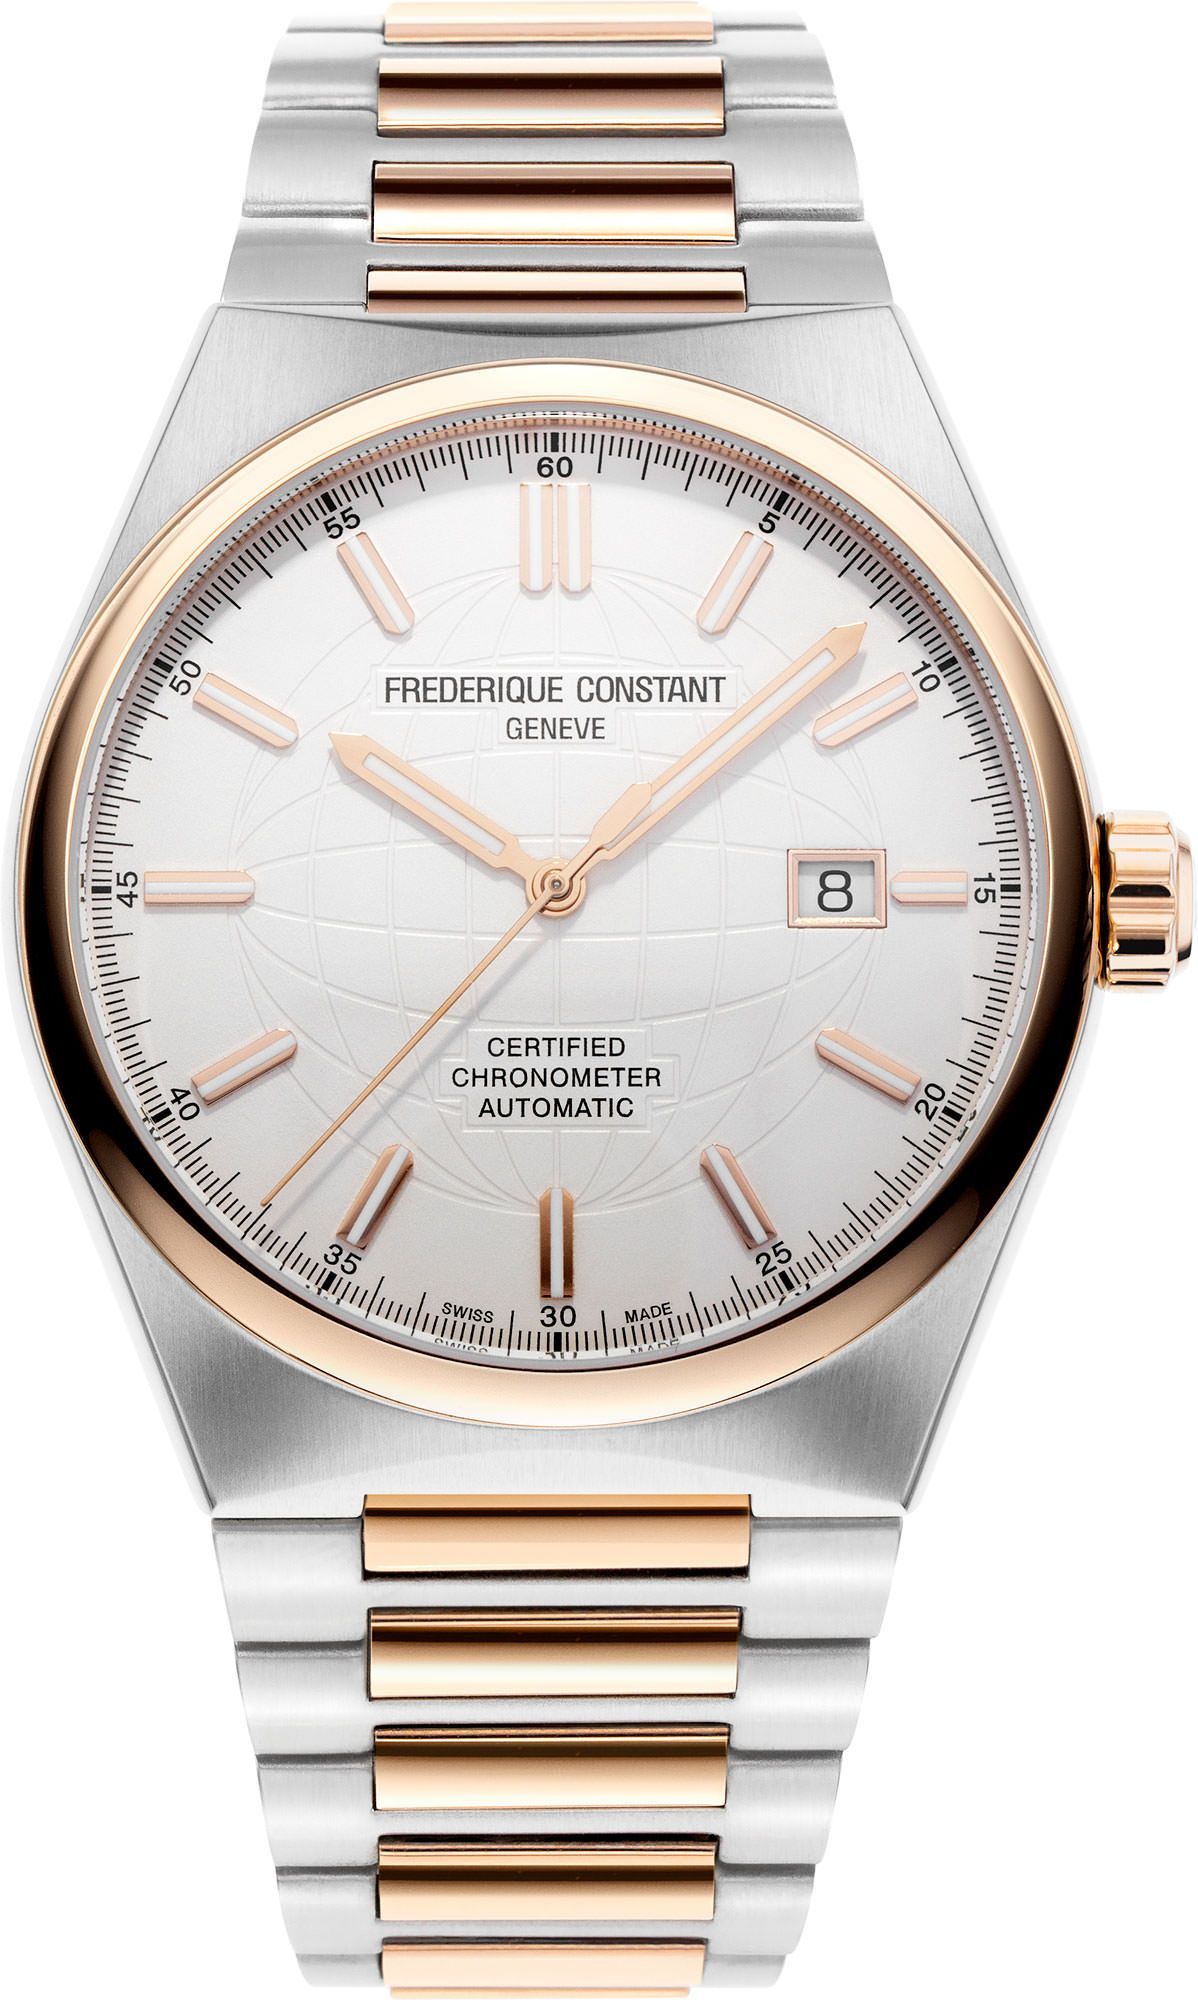 Frederique Constant Highlife Highlife Automatic COSC Silver Dial 41 mm Automatic Watch For Men - 1